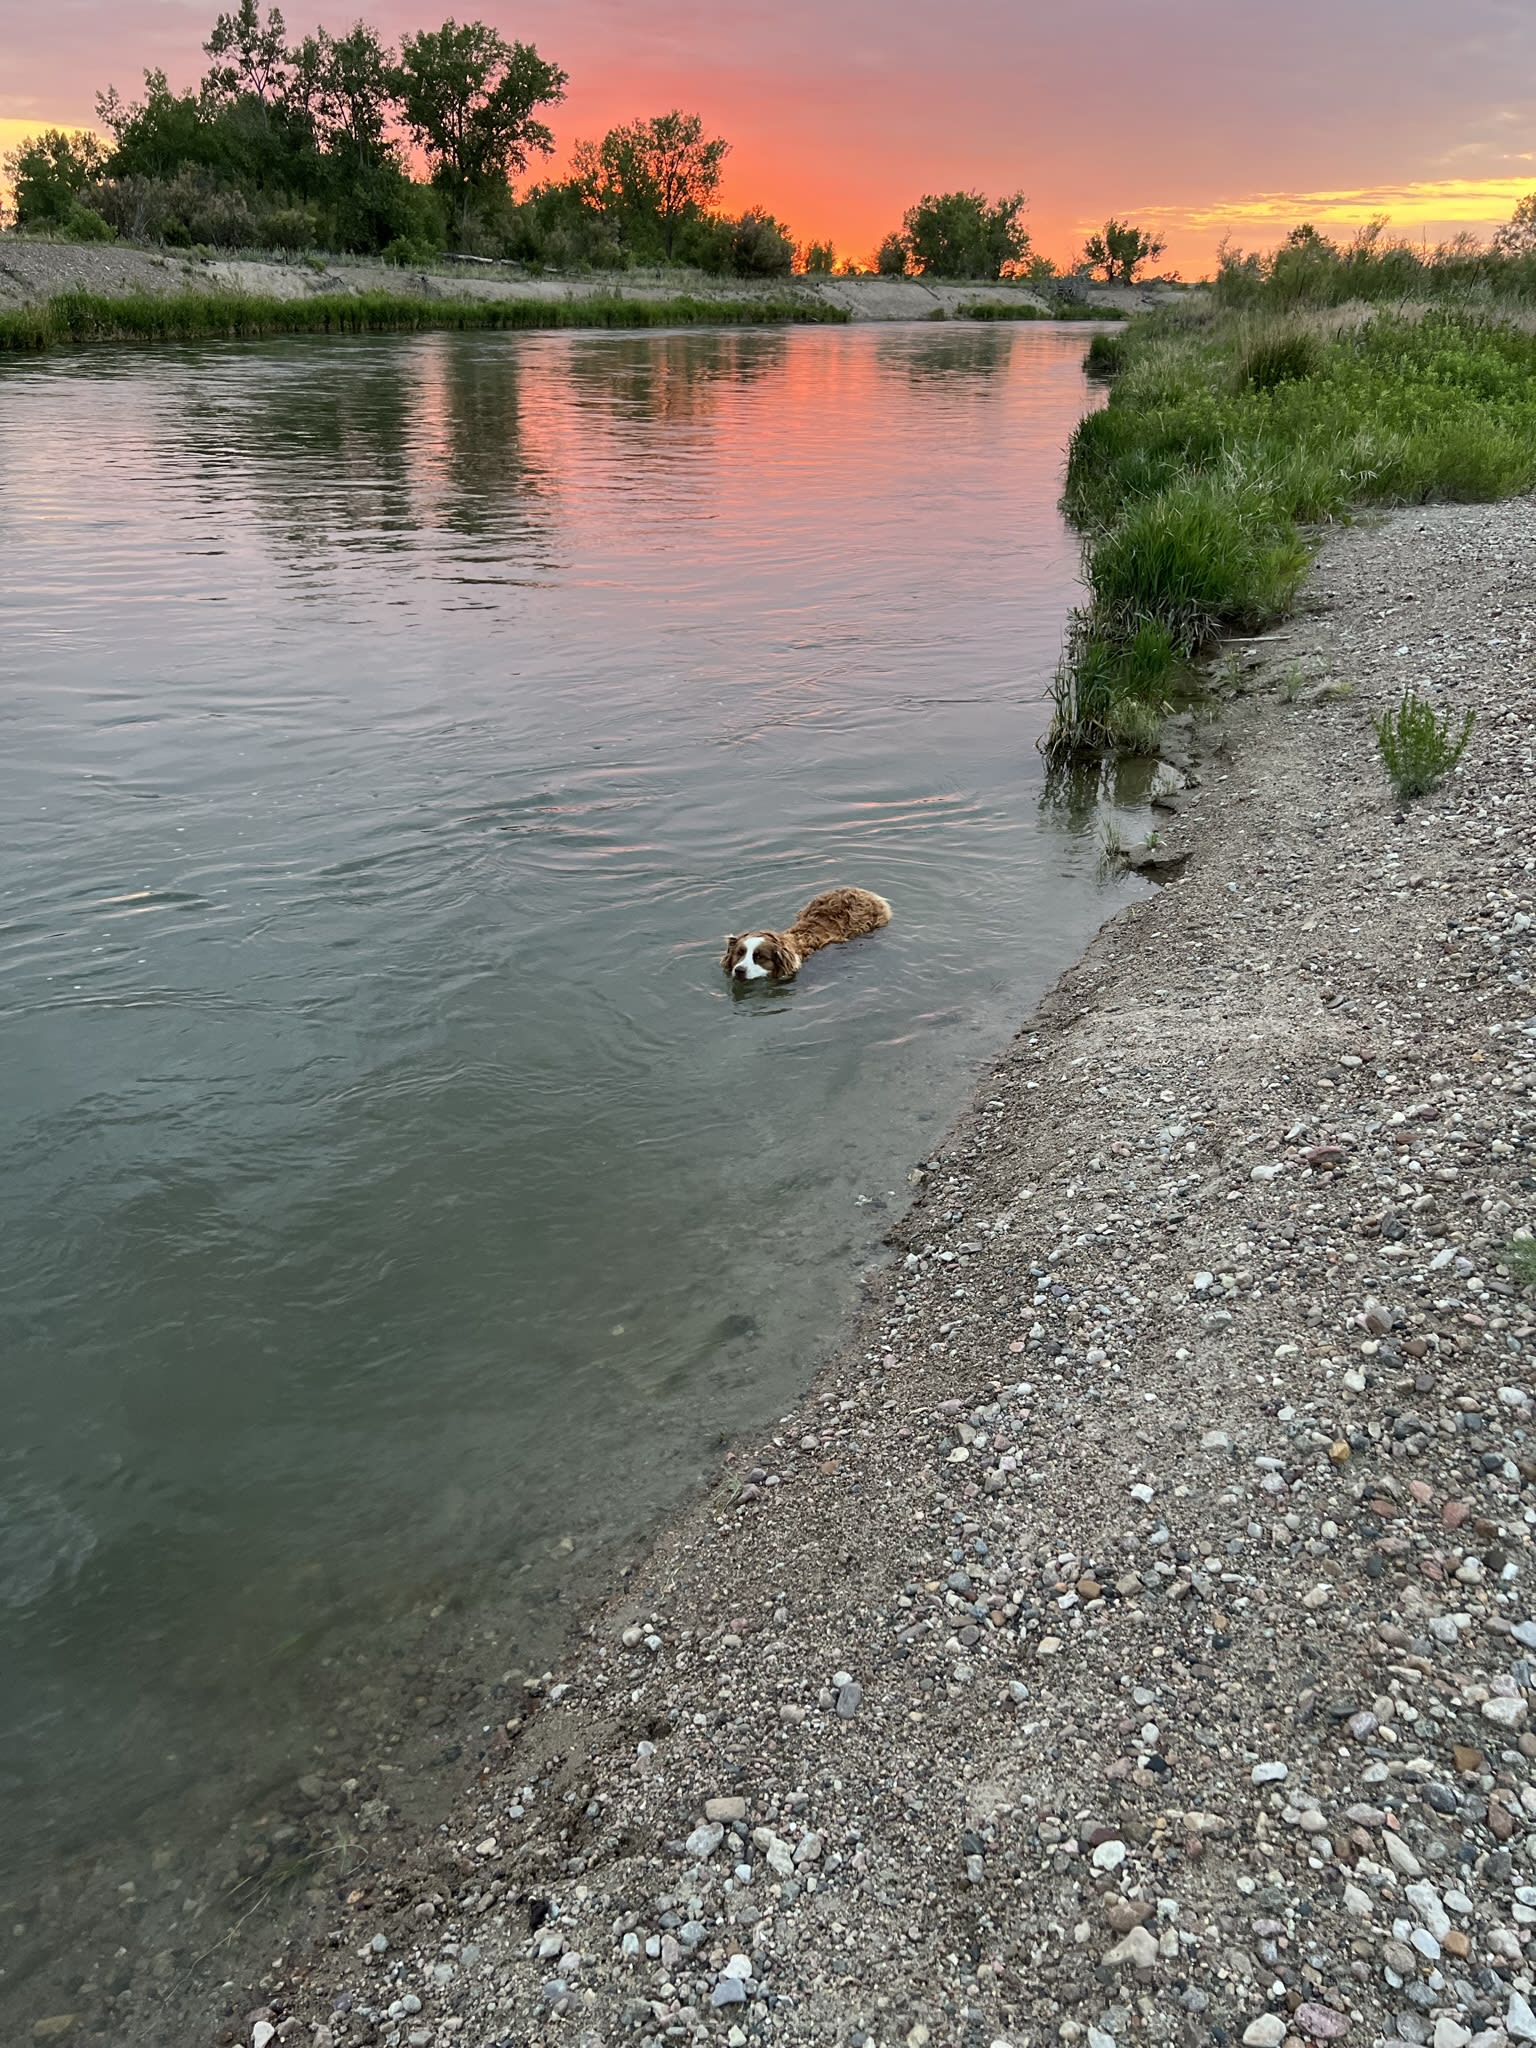 Our pups love to cool off in the river